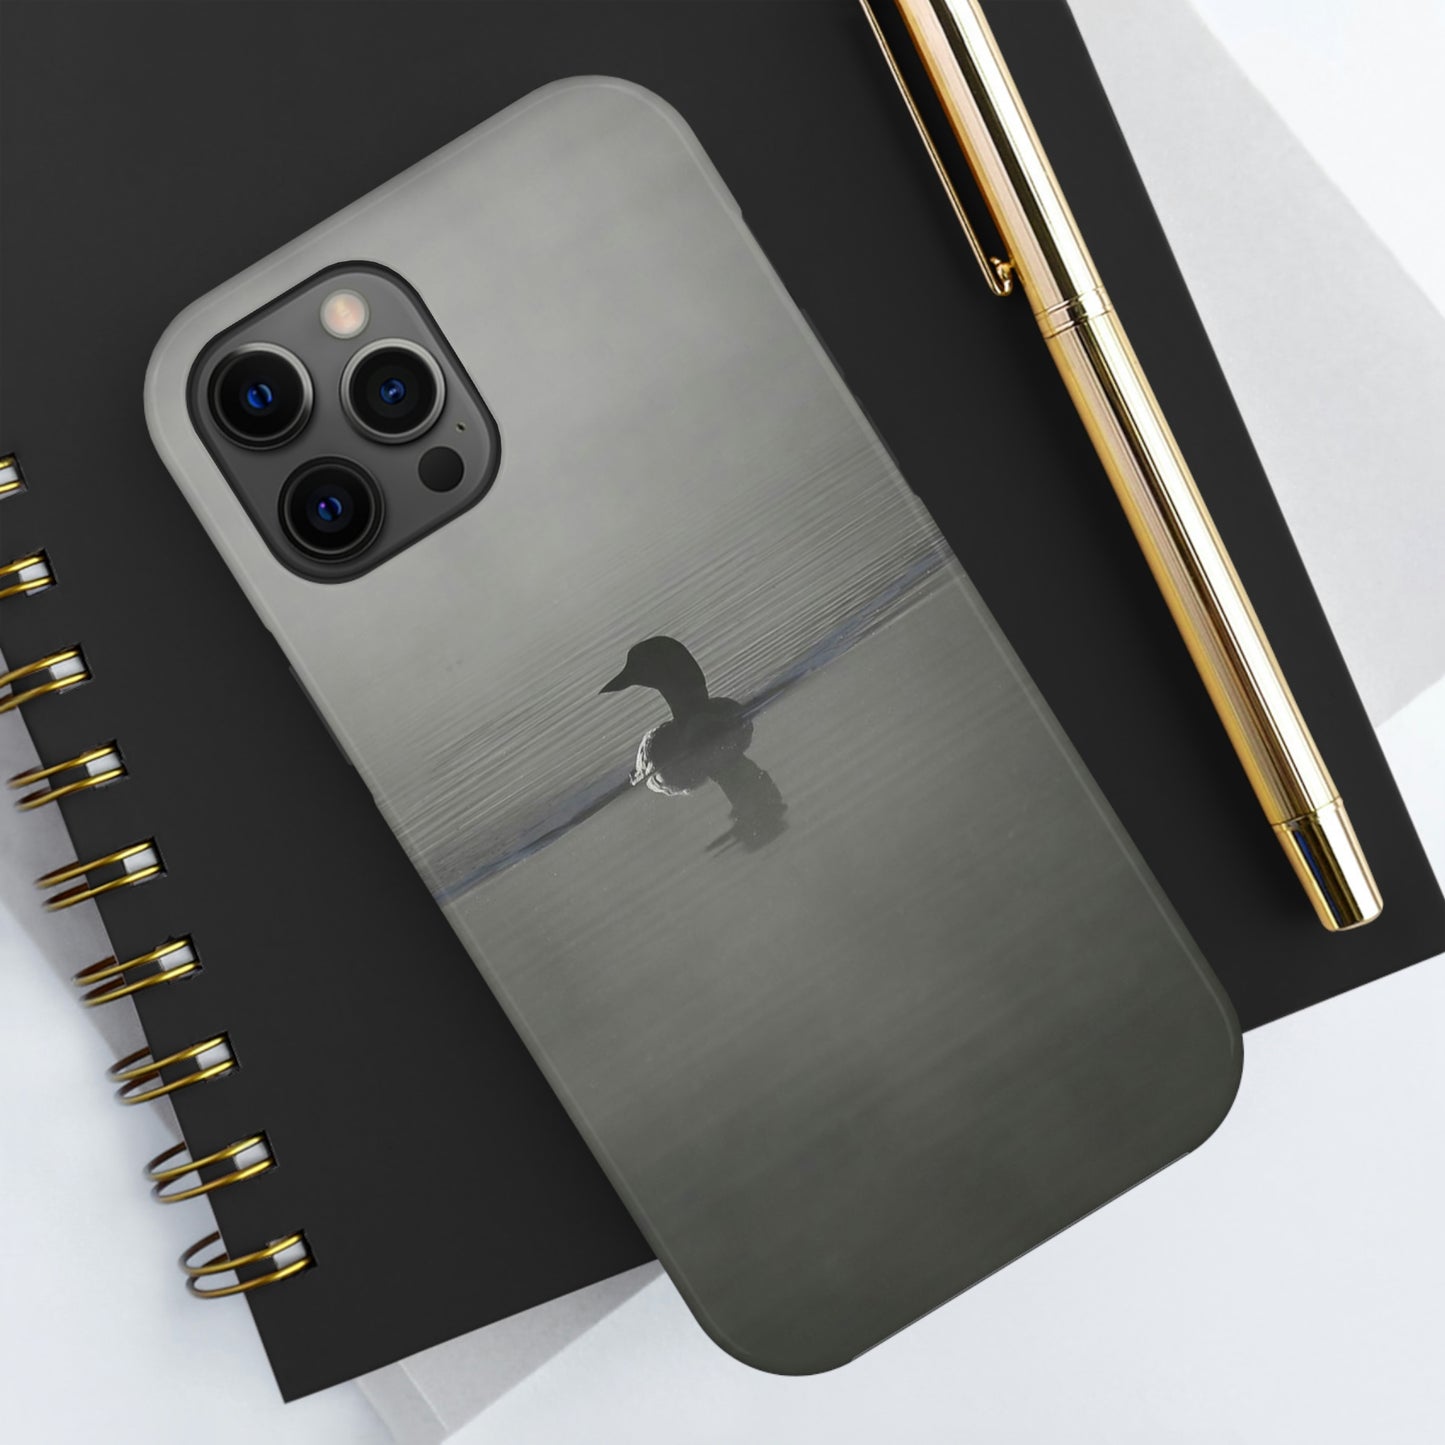 Impact Resistant Phone Case - Loon in the Mist